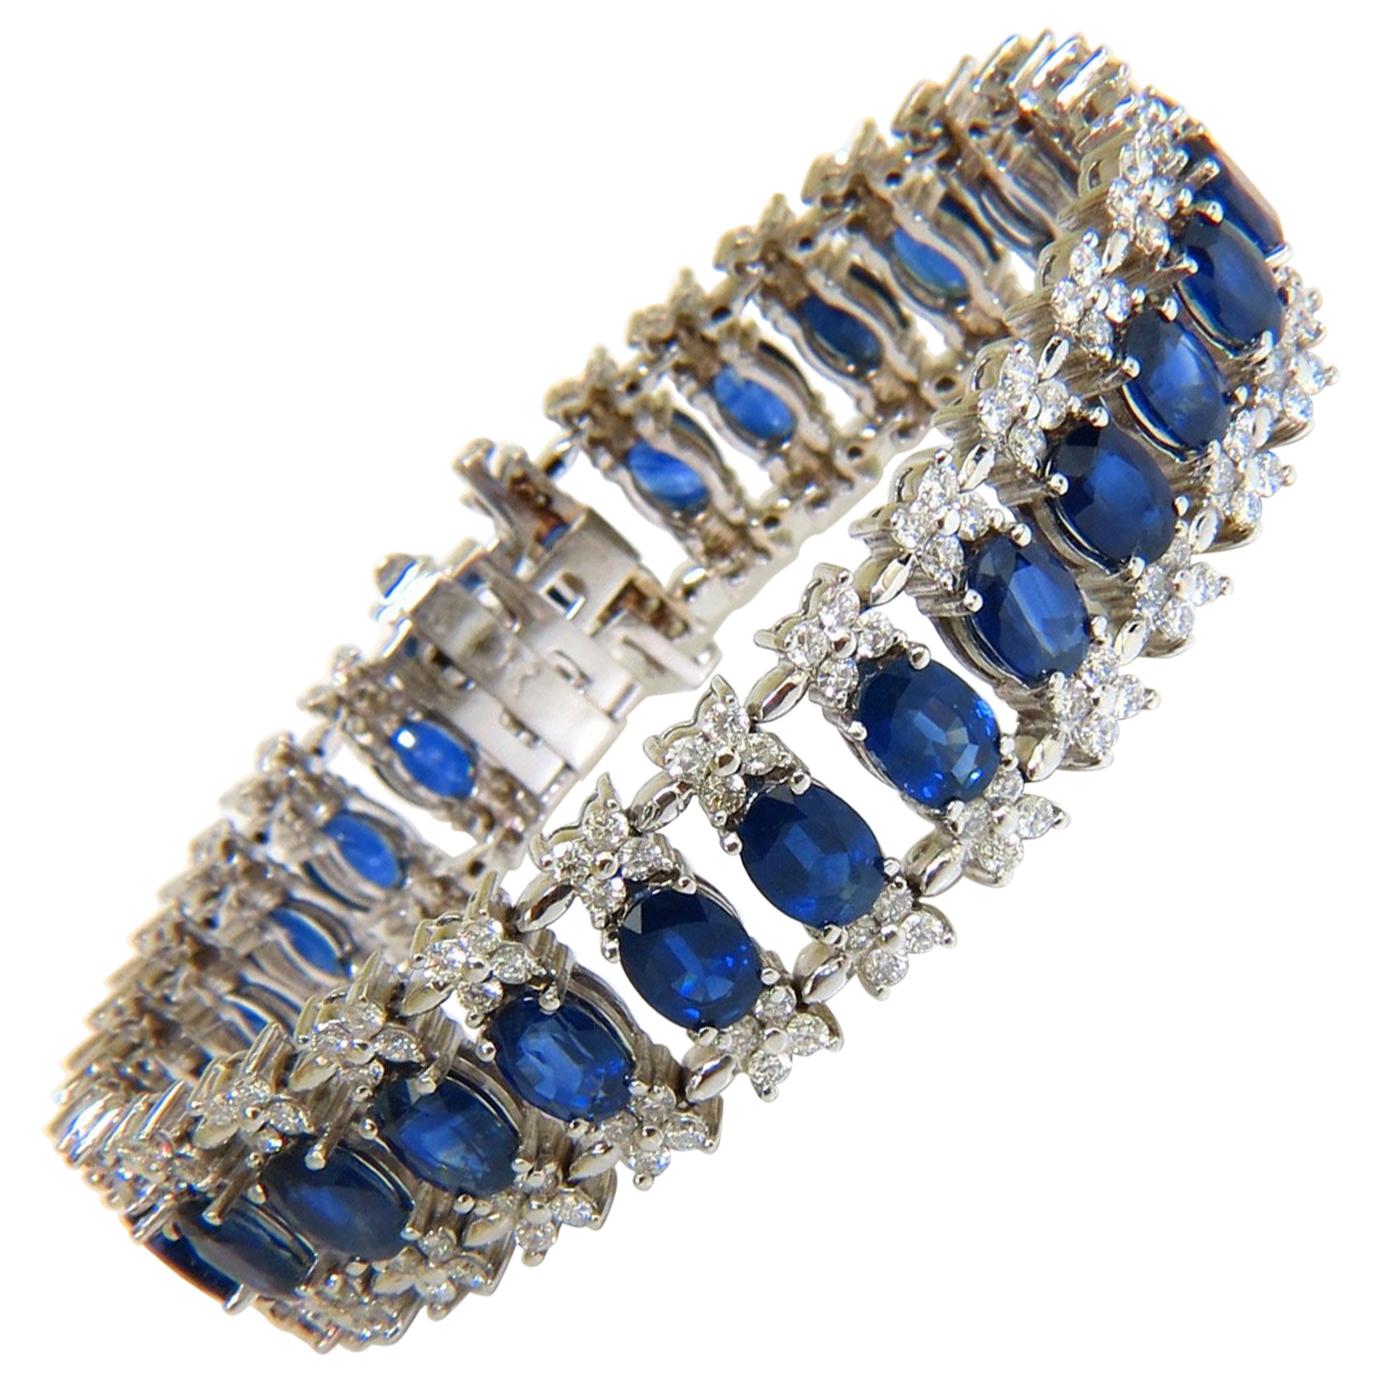 33.75 Carat Natural Gem Sapphire Diamond Bracelet Three-Row and Wide Cuff For Sale